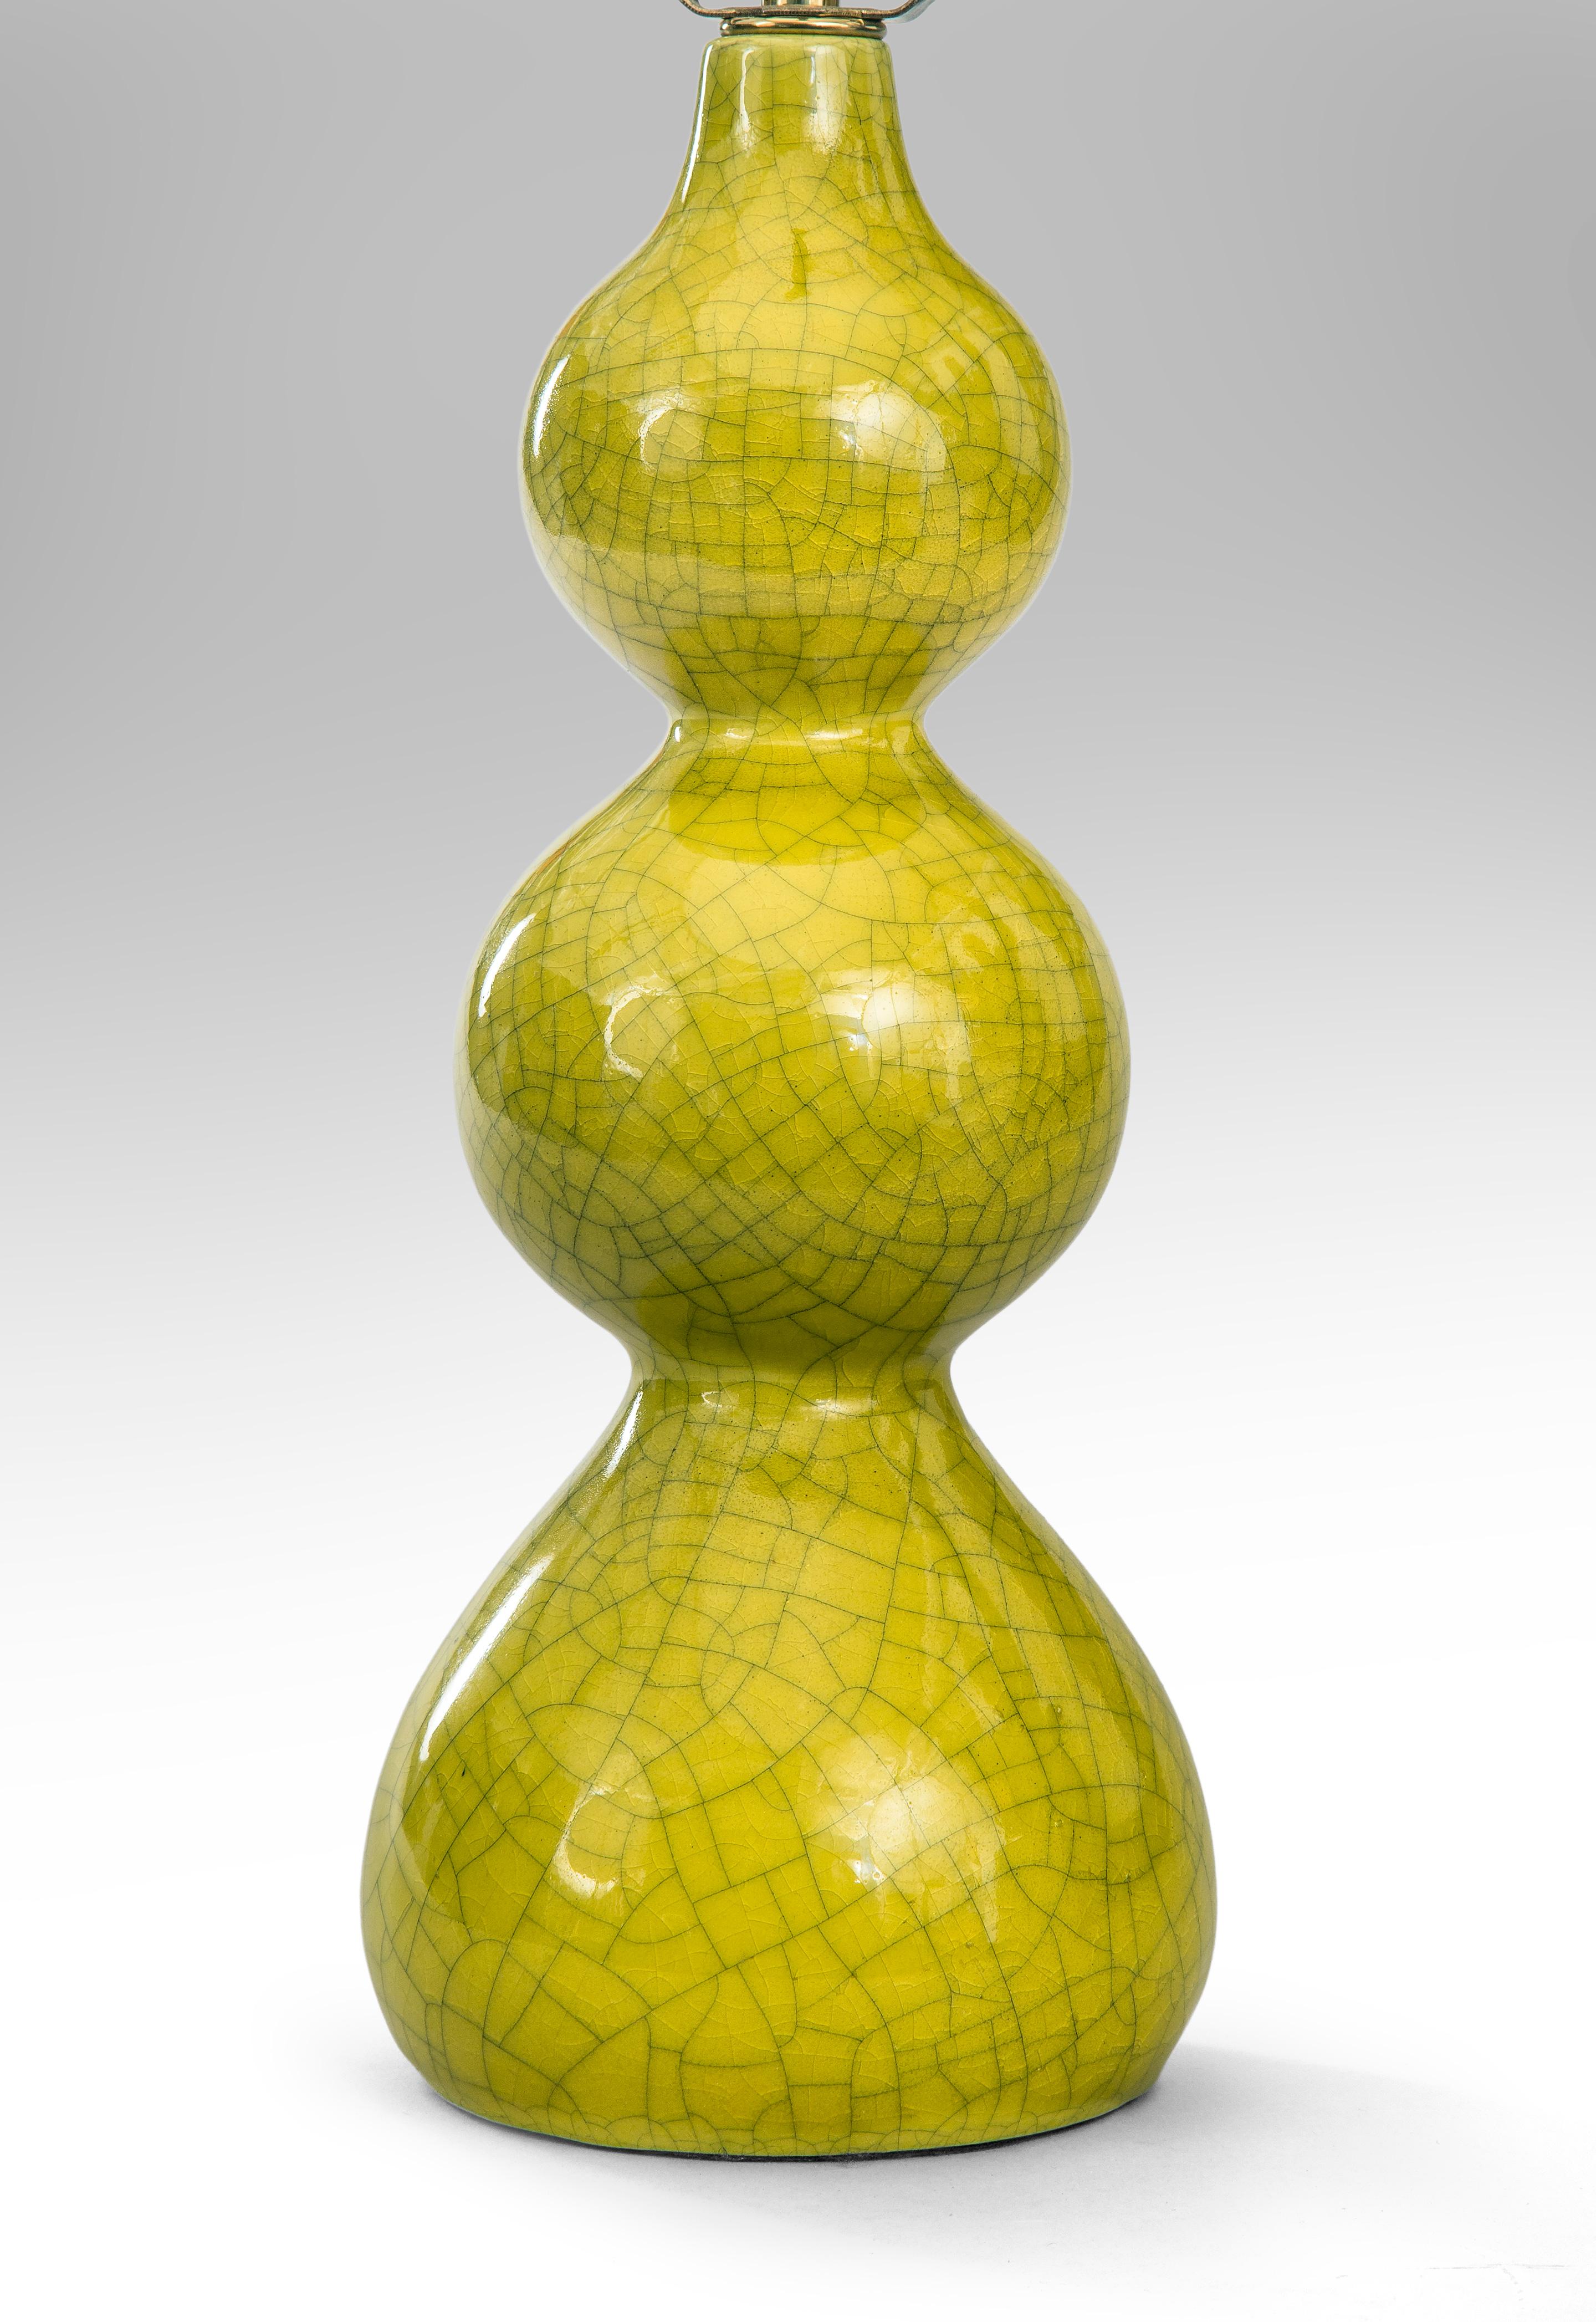 Midcentury Triple Gourd Lamp
Mid-20th century
Classic triple gourd shapes are one of the most enduring of all ceramic forms going well with the most modern or traditional interior. The richly colored chartreuse glaze enhanced by a distinctive